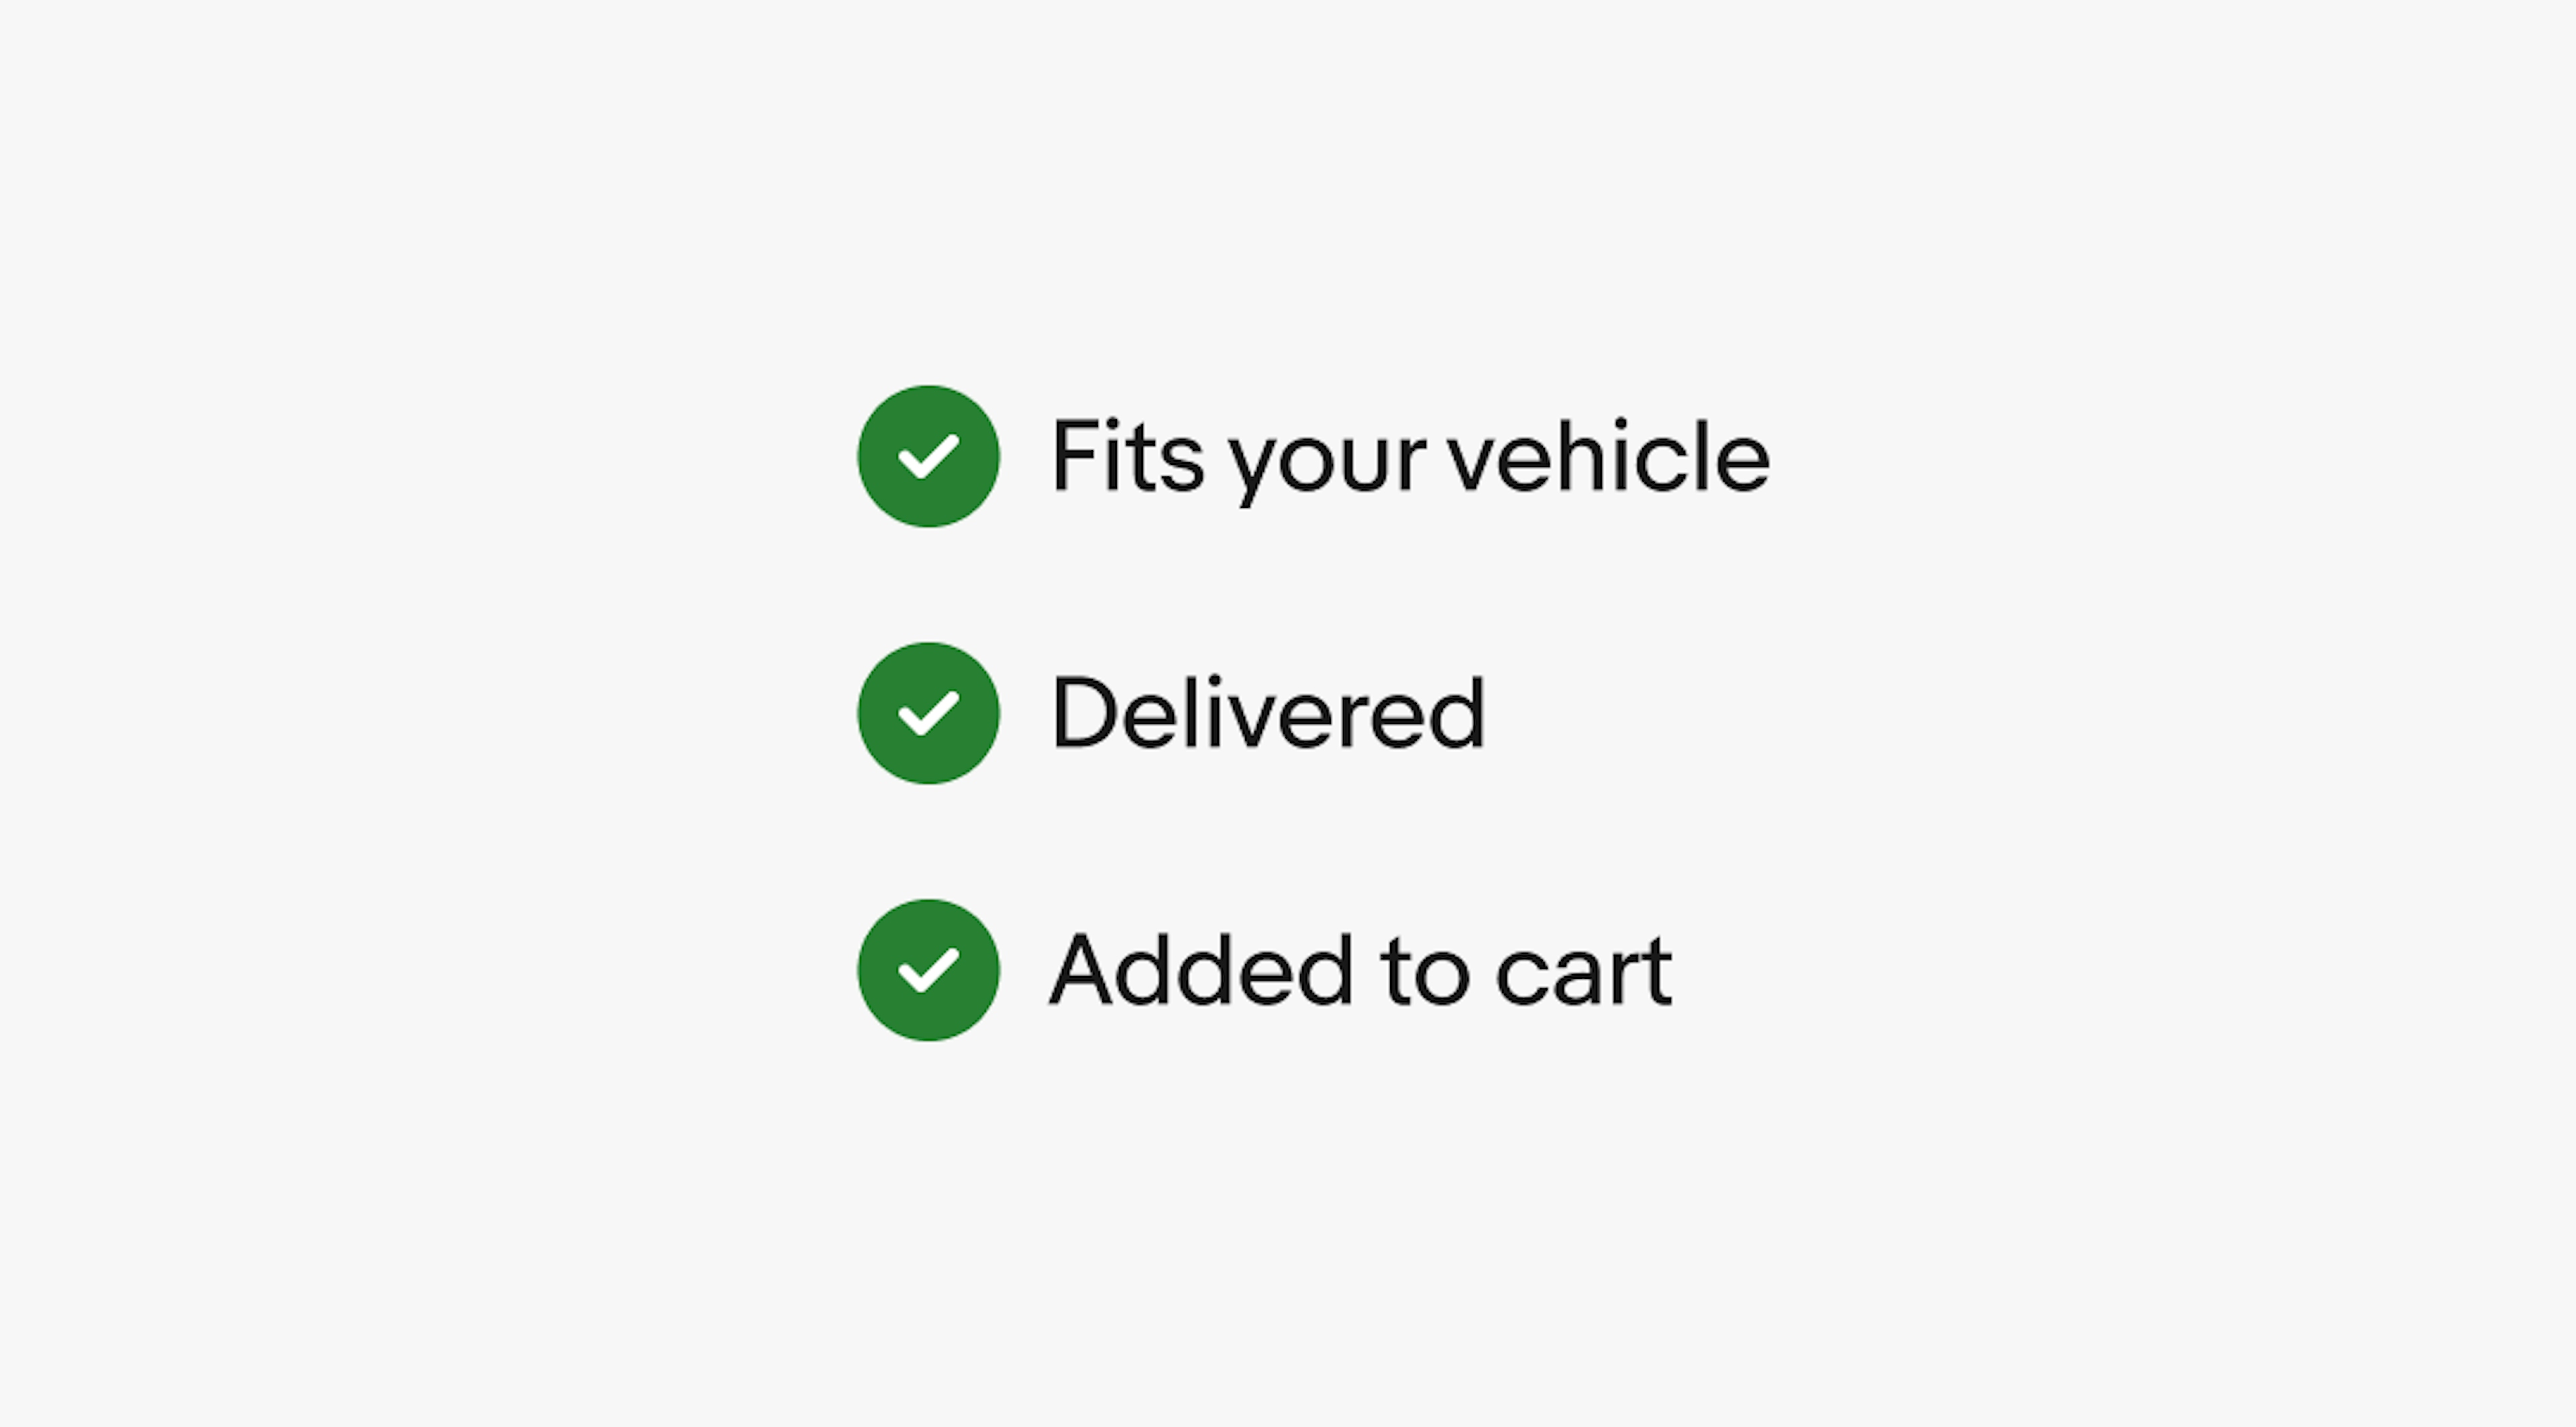 Three confirmation indicator lockups all with green filled checkmarks. From top to bottom is Fits your vehicle, Delivered, and Added to cart.